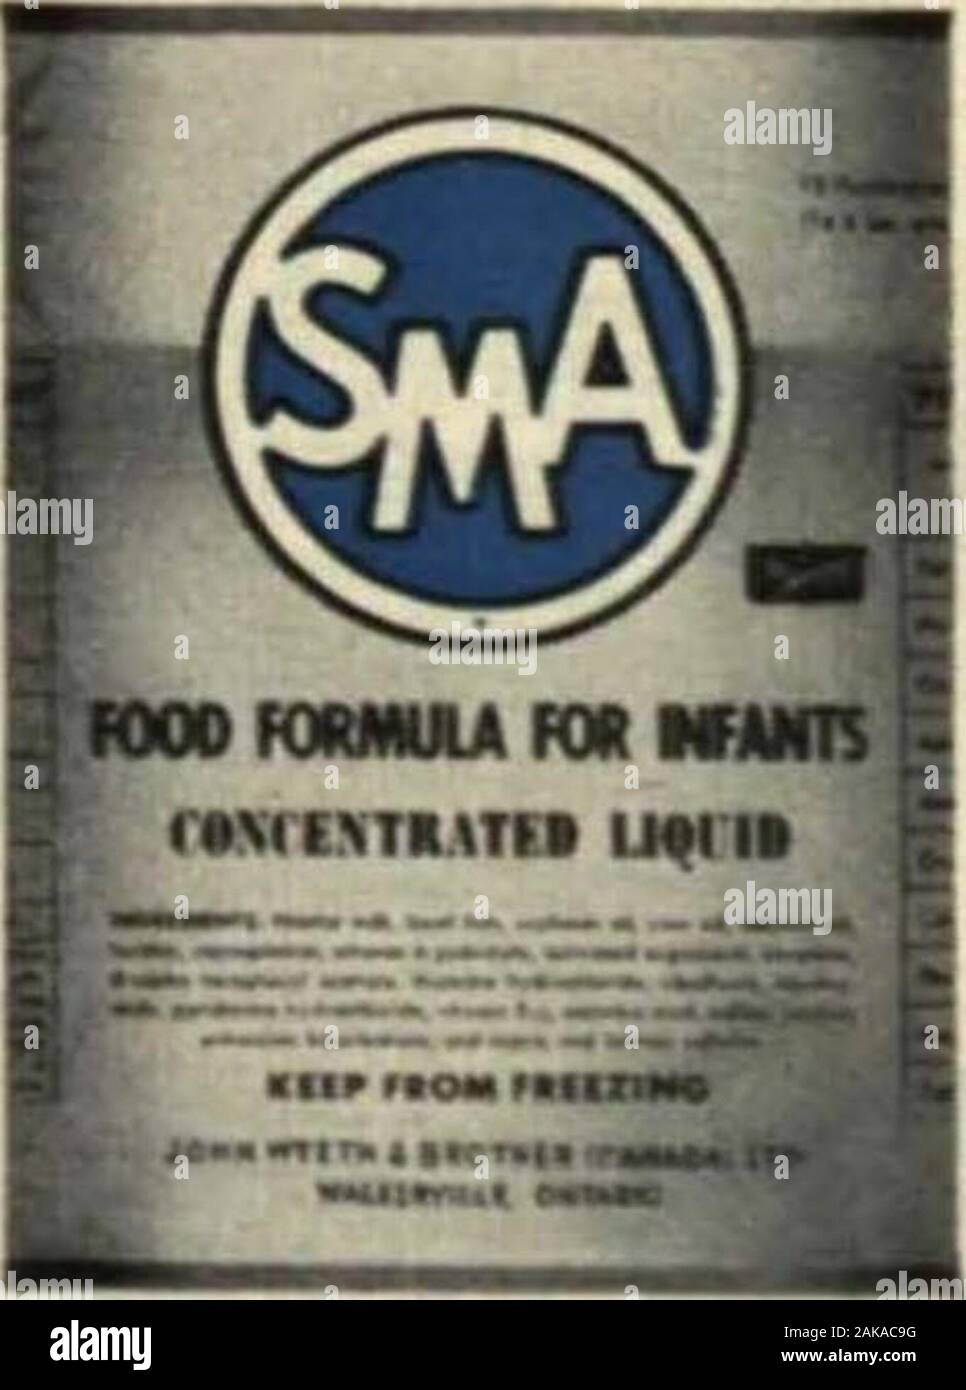 The Canadian nurse . 74Jfa& ttecv? S*M*A Concentrated Liquid isnew — thats what! Mothers everywhere will welcome thenew convenience and simplicity of for-mula preparation. Simply add an equalvolume of previously boiled water toS*M*A Concentrated Liquid and presto,babys formula is ready. The S*M*A formula is always the same incomposition whether prepared fromS»M«A Powder or Liquid S»M»A—thecomplete formula that most nearly resem-bles mothers milk. S-M-A ti- oM3.S 1 ... (I»p*rUI &gt;w. LIQUID !•» Ml Mort wumvui ontamo AUGUST. 1961 • VOL. 57. No. 8 Nurses areATTRACTED to theUNIVERSITY ofMINNESOTA Stock Photo